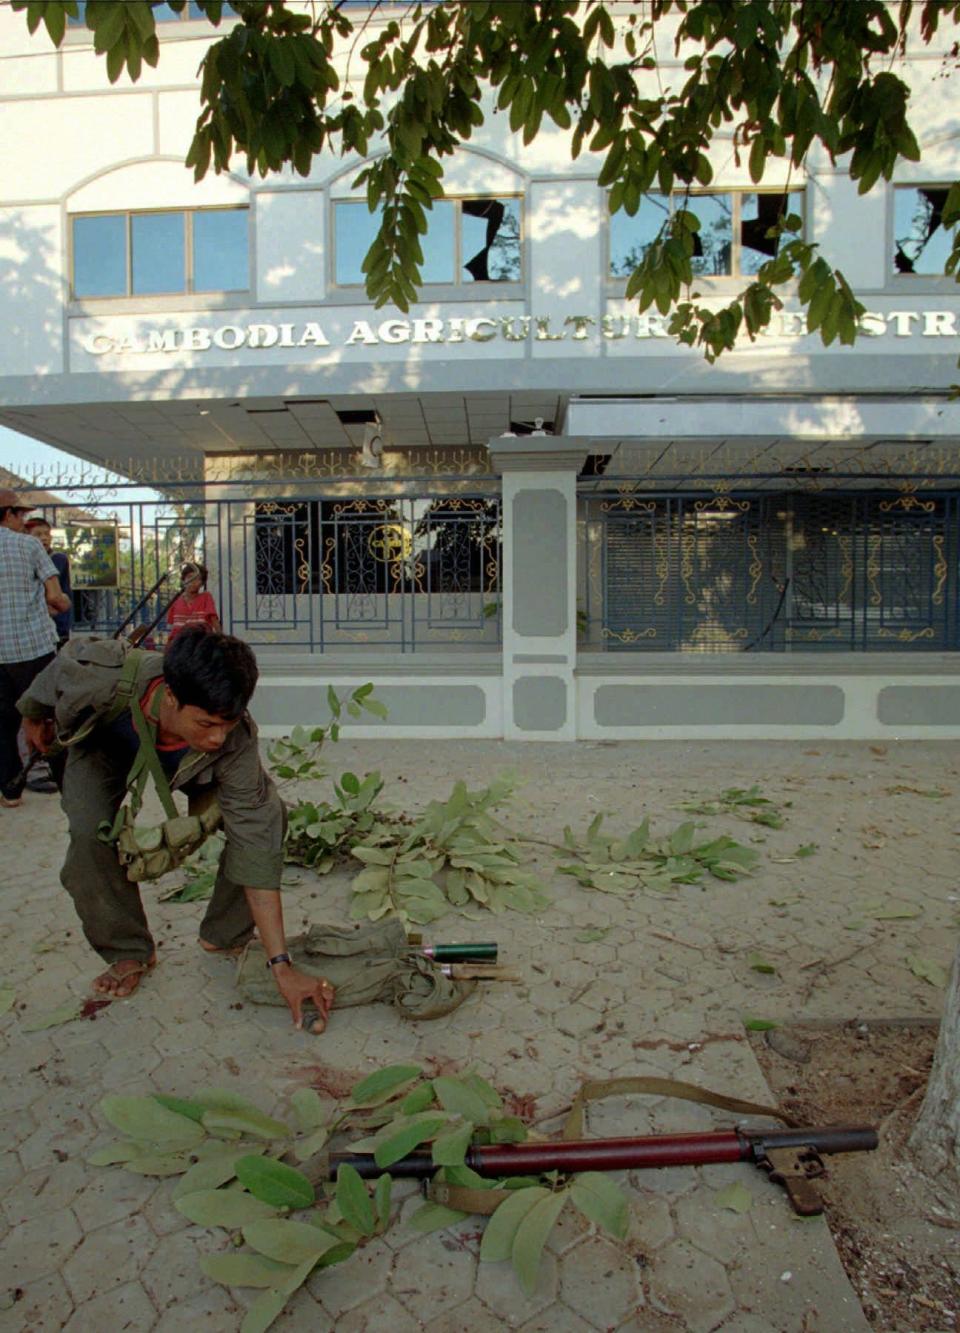 A Cambodian government soldier inspects a grenade launcher used  during a battle in Phnom Penh on June 17, 1997, after Funcinpec and Cambodian People's Party troops traded gunfire and rockets in fighting that left at least one soldier dead. One rocket struck the U.S. Embassy.